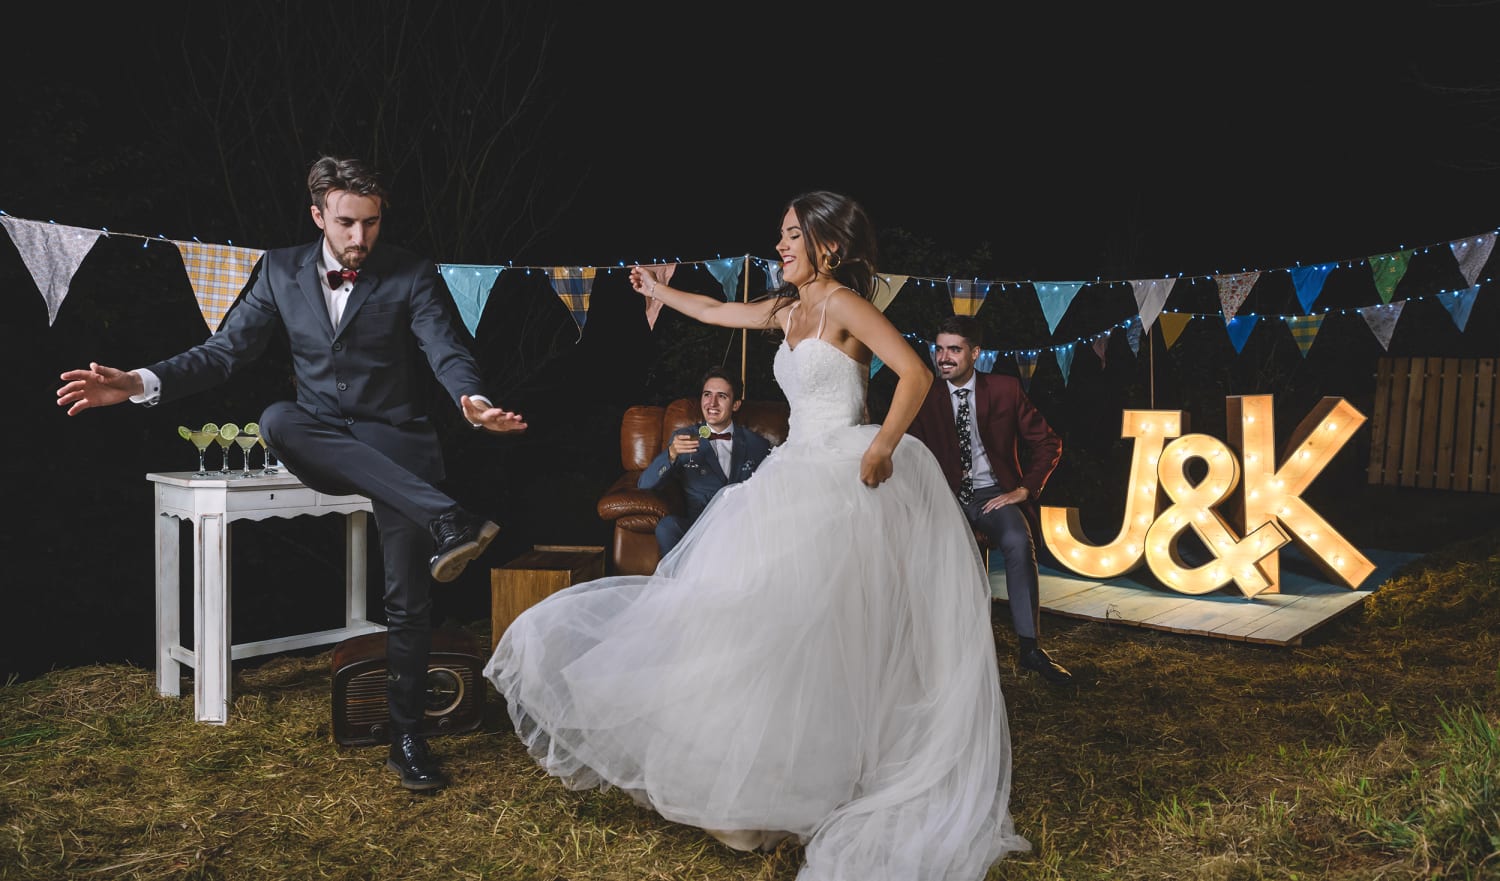 The Top 10 Wedding Songs For 2021 – Don't Miss No. 5!